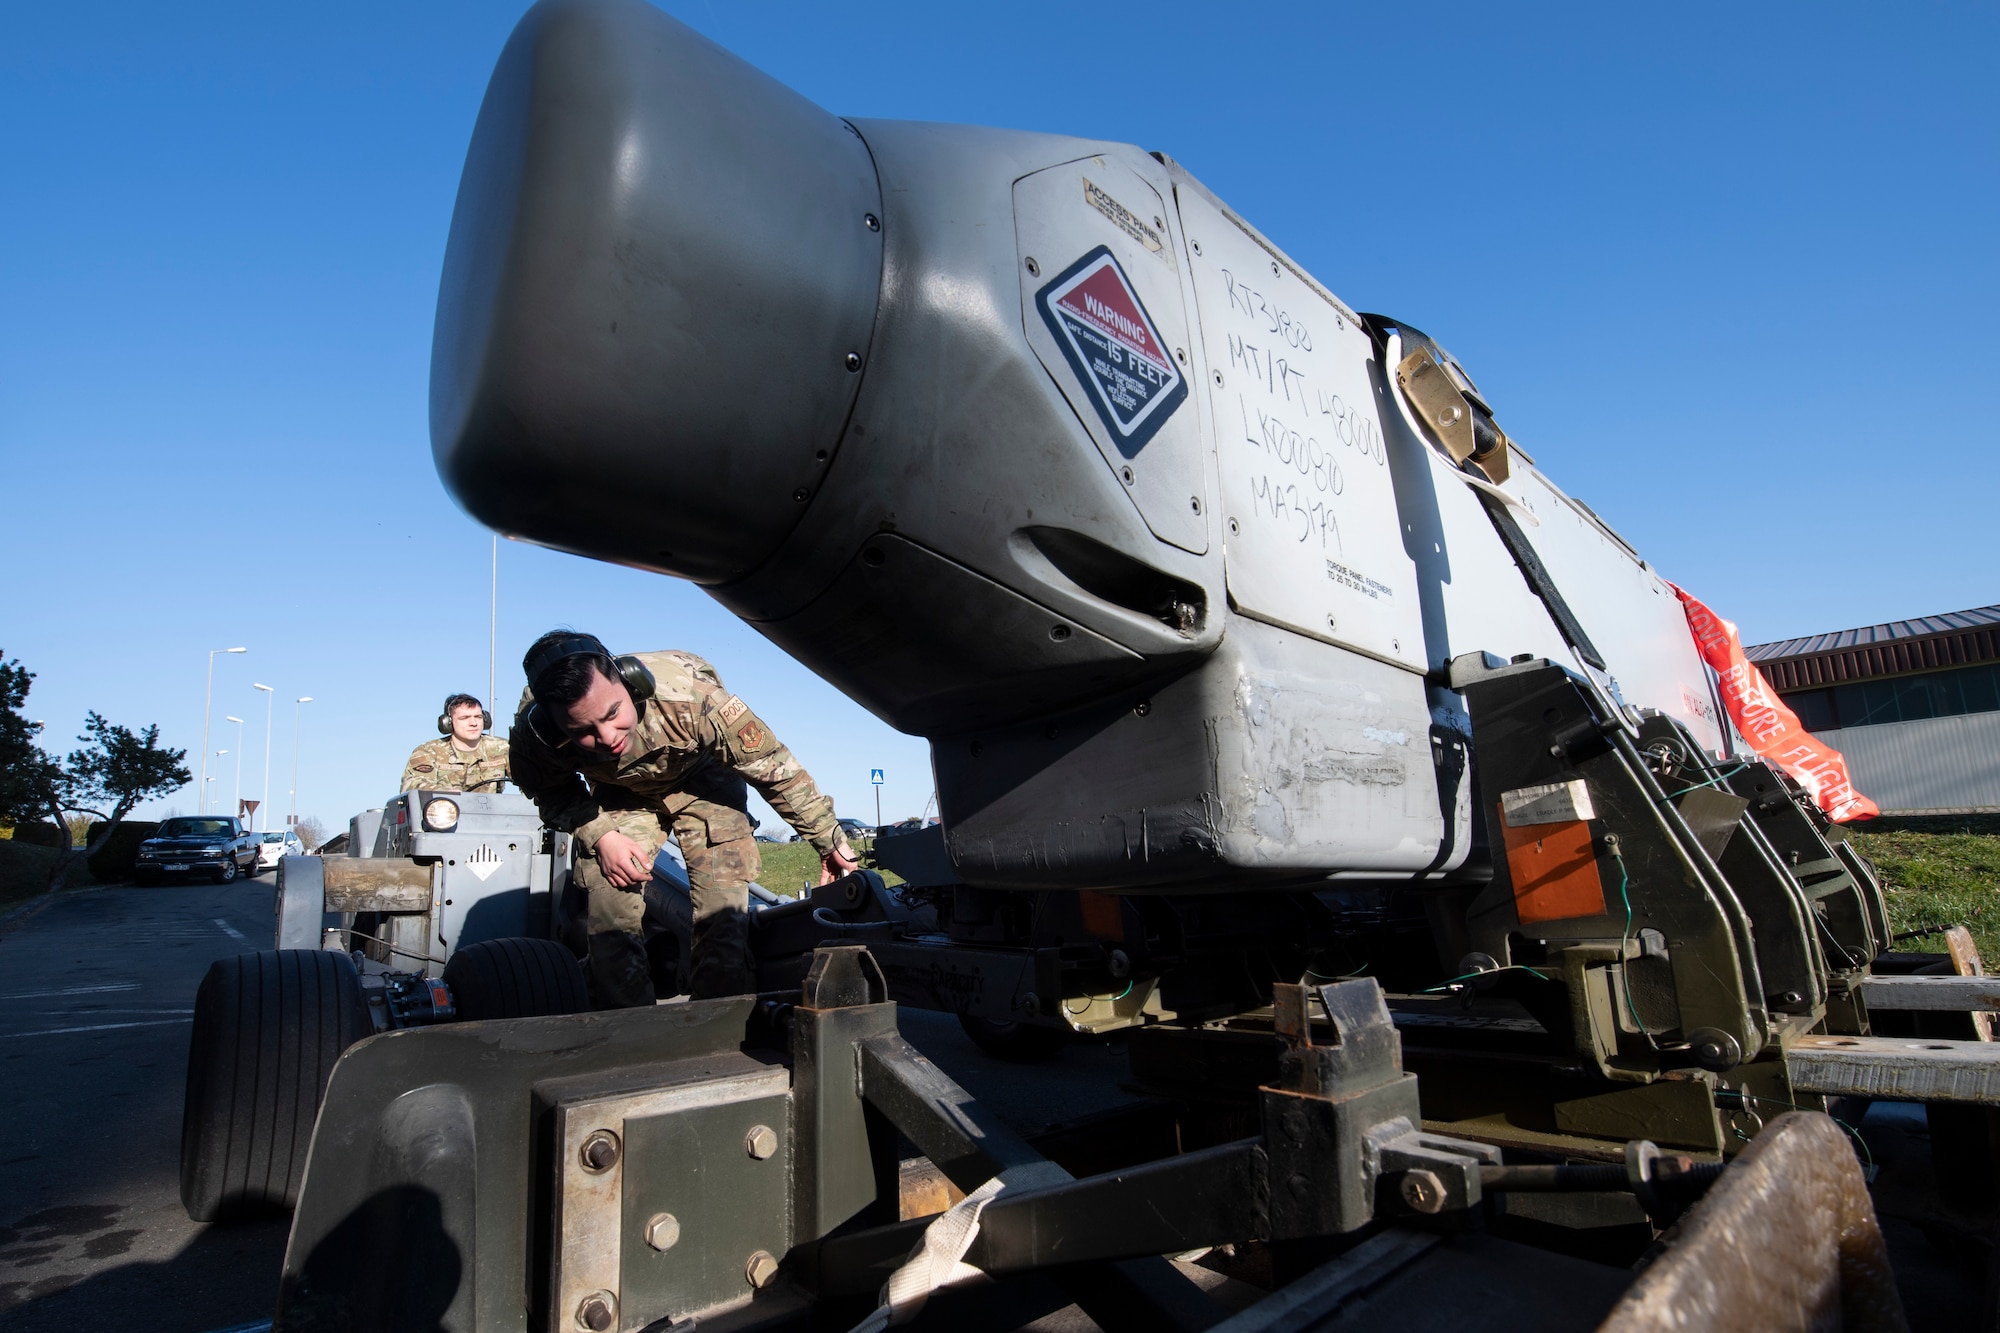 52nd Fighter Wing Airmen work with electronic countermeasure pod